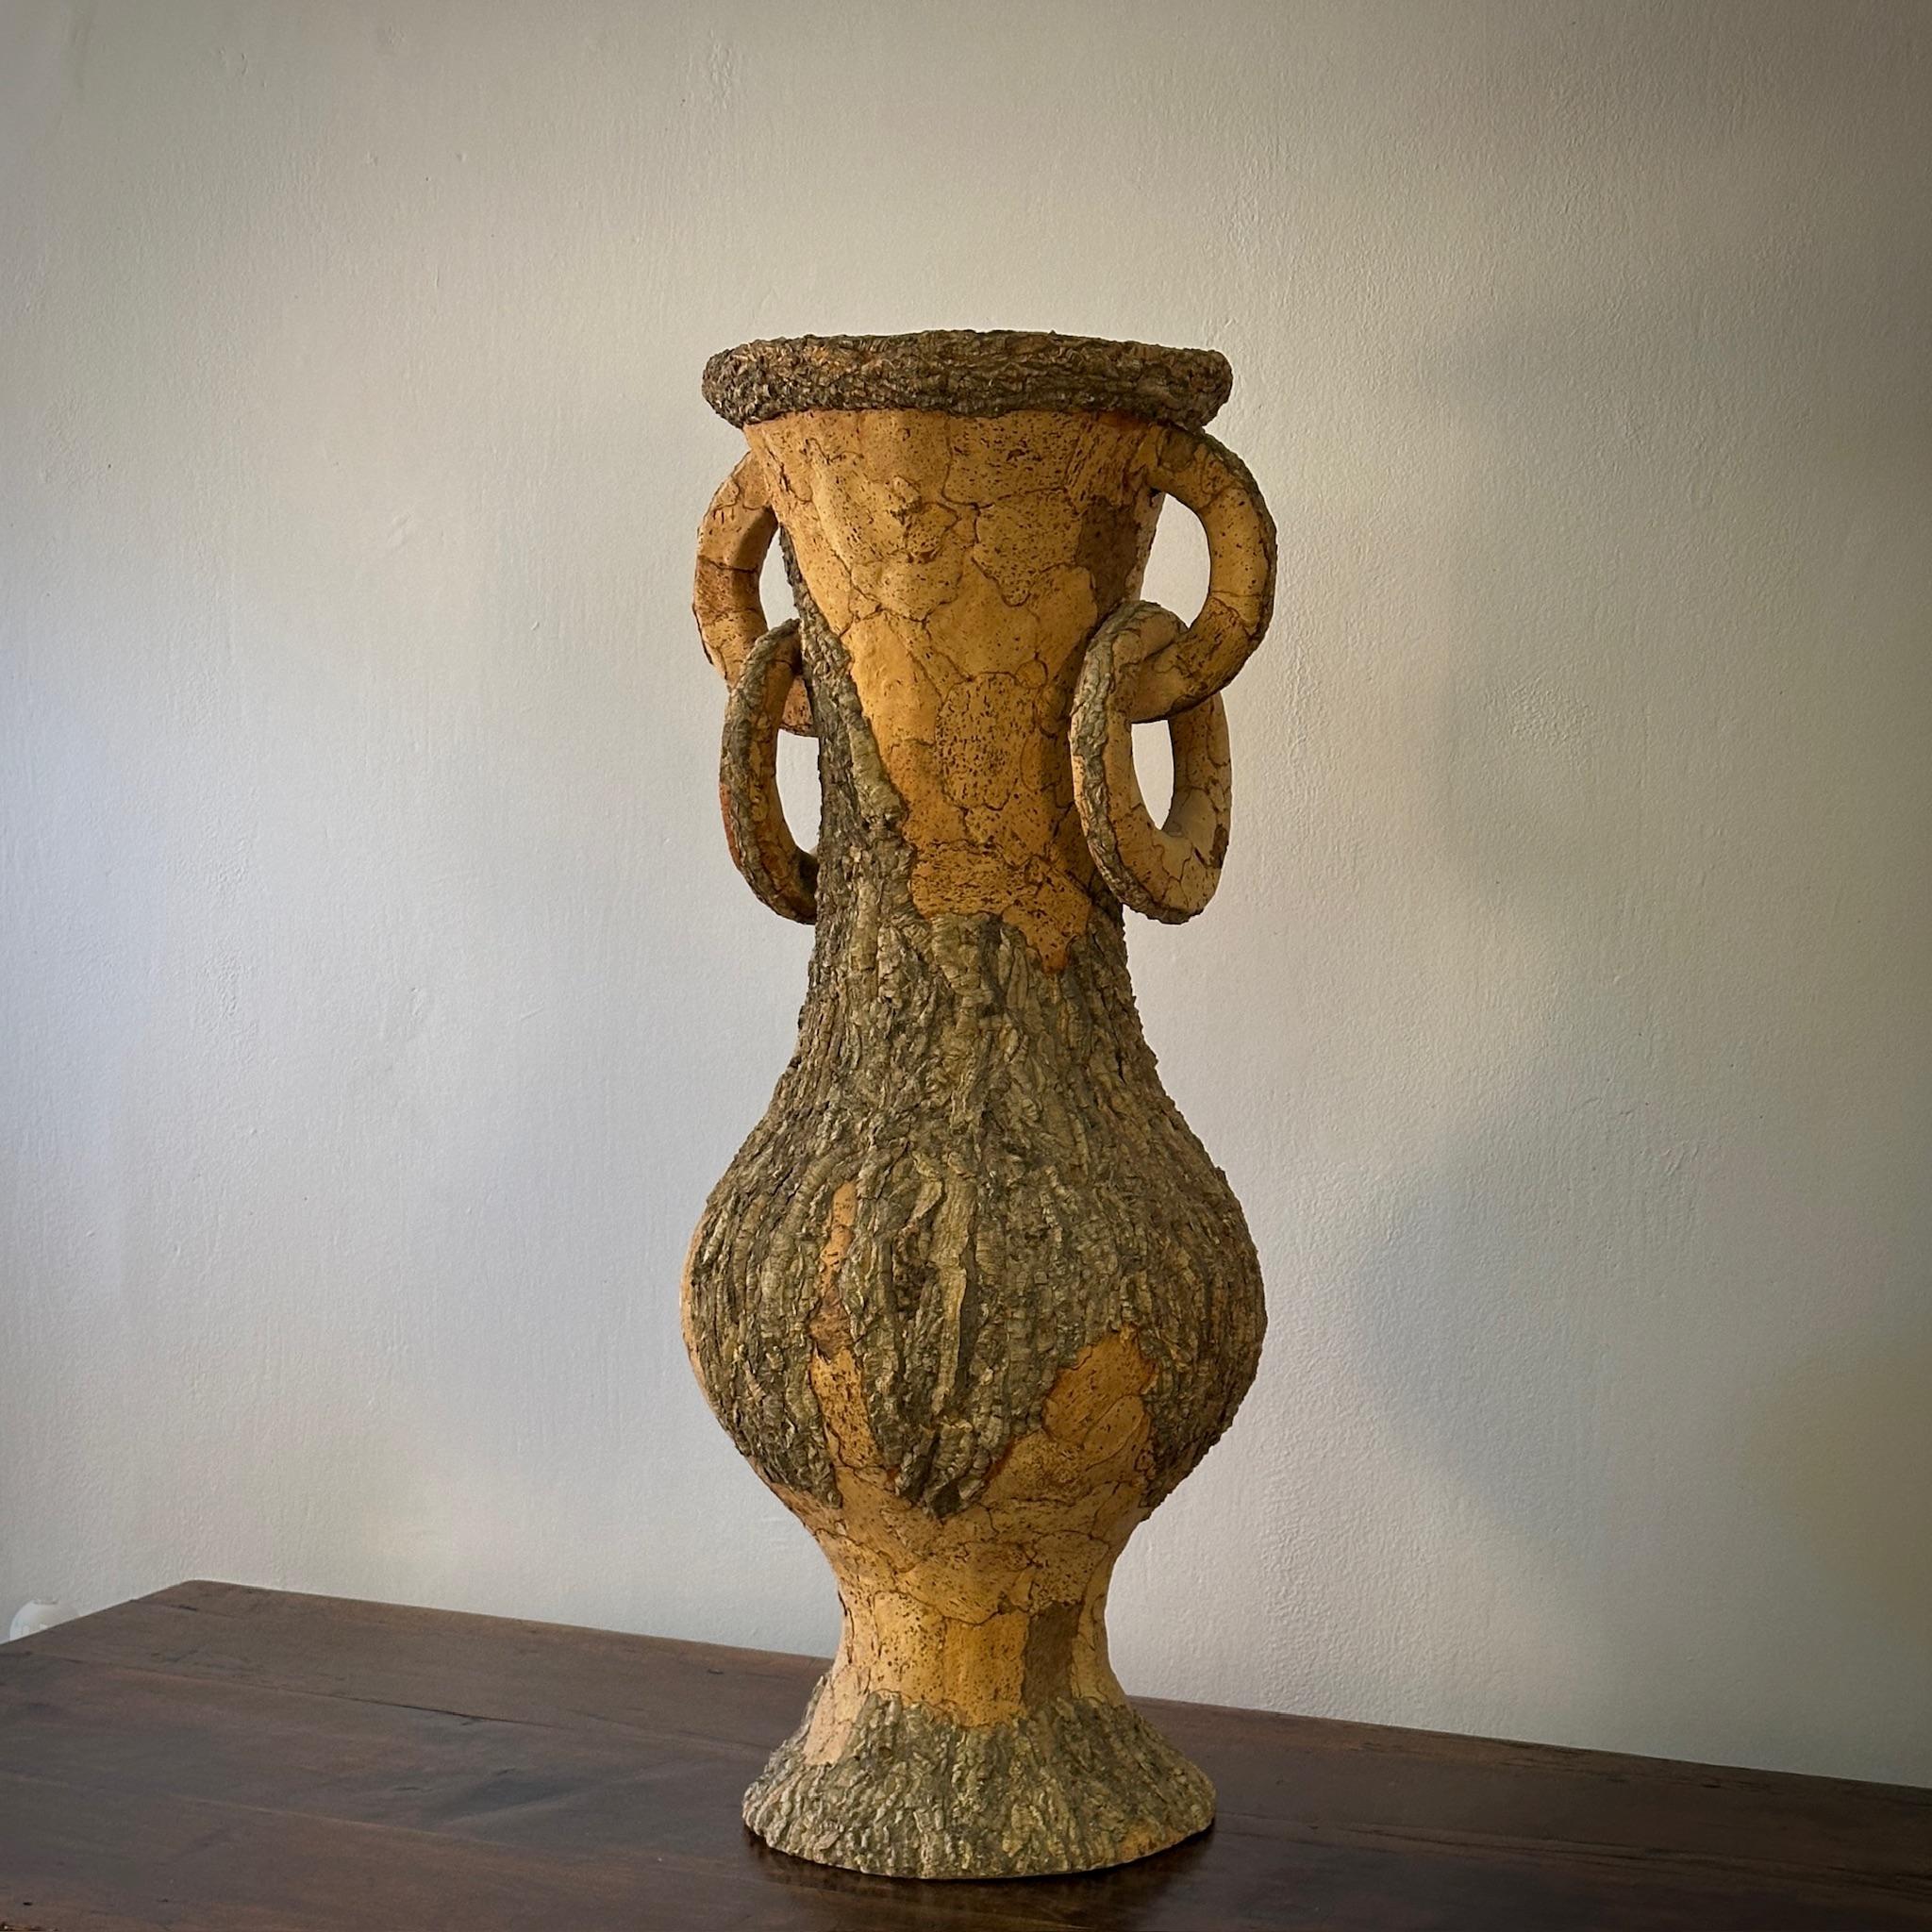 Large early 20th century French urn in cork with a naturalist finish and amphora shape. Featuring two handles with ring accoutrements, this sculptural vessel adds an organic yet stately touch to any room.

France, circa 1900

Dimensions: 14.5W x